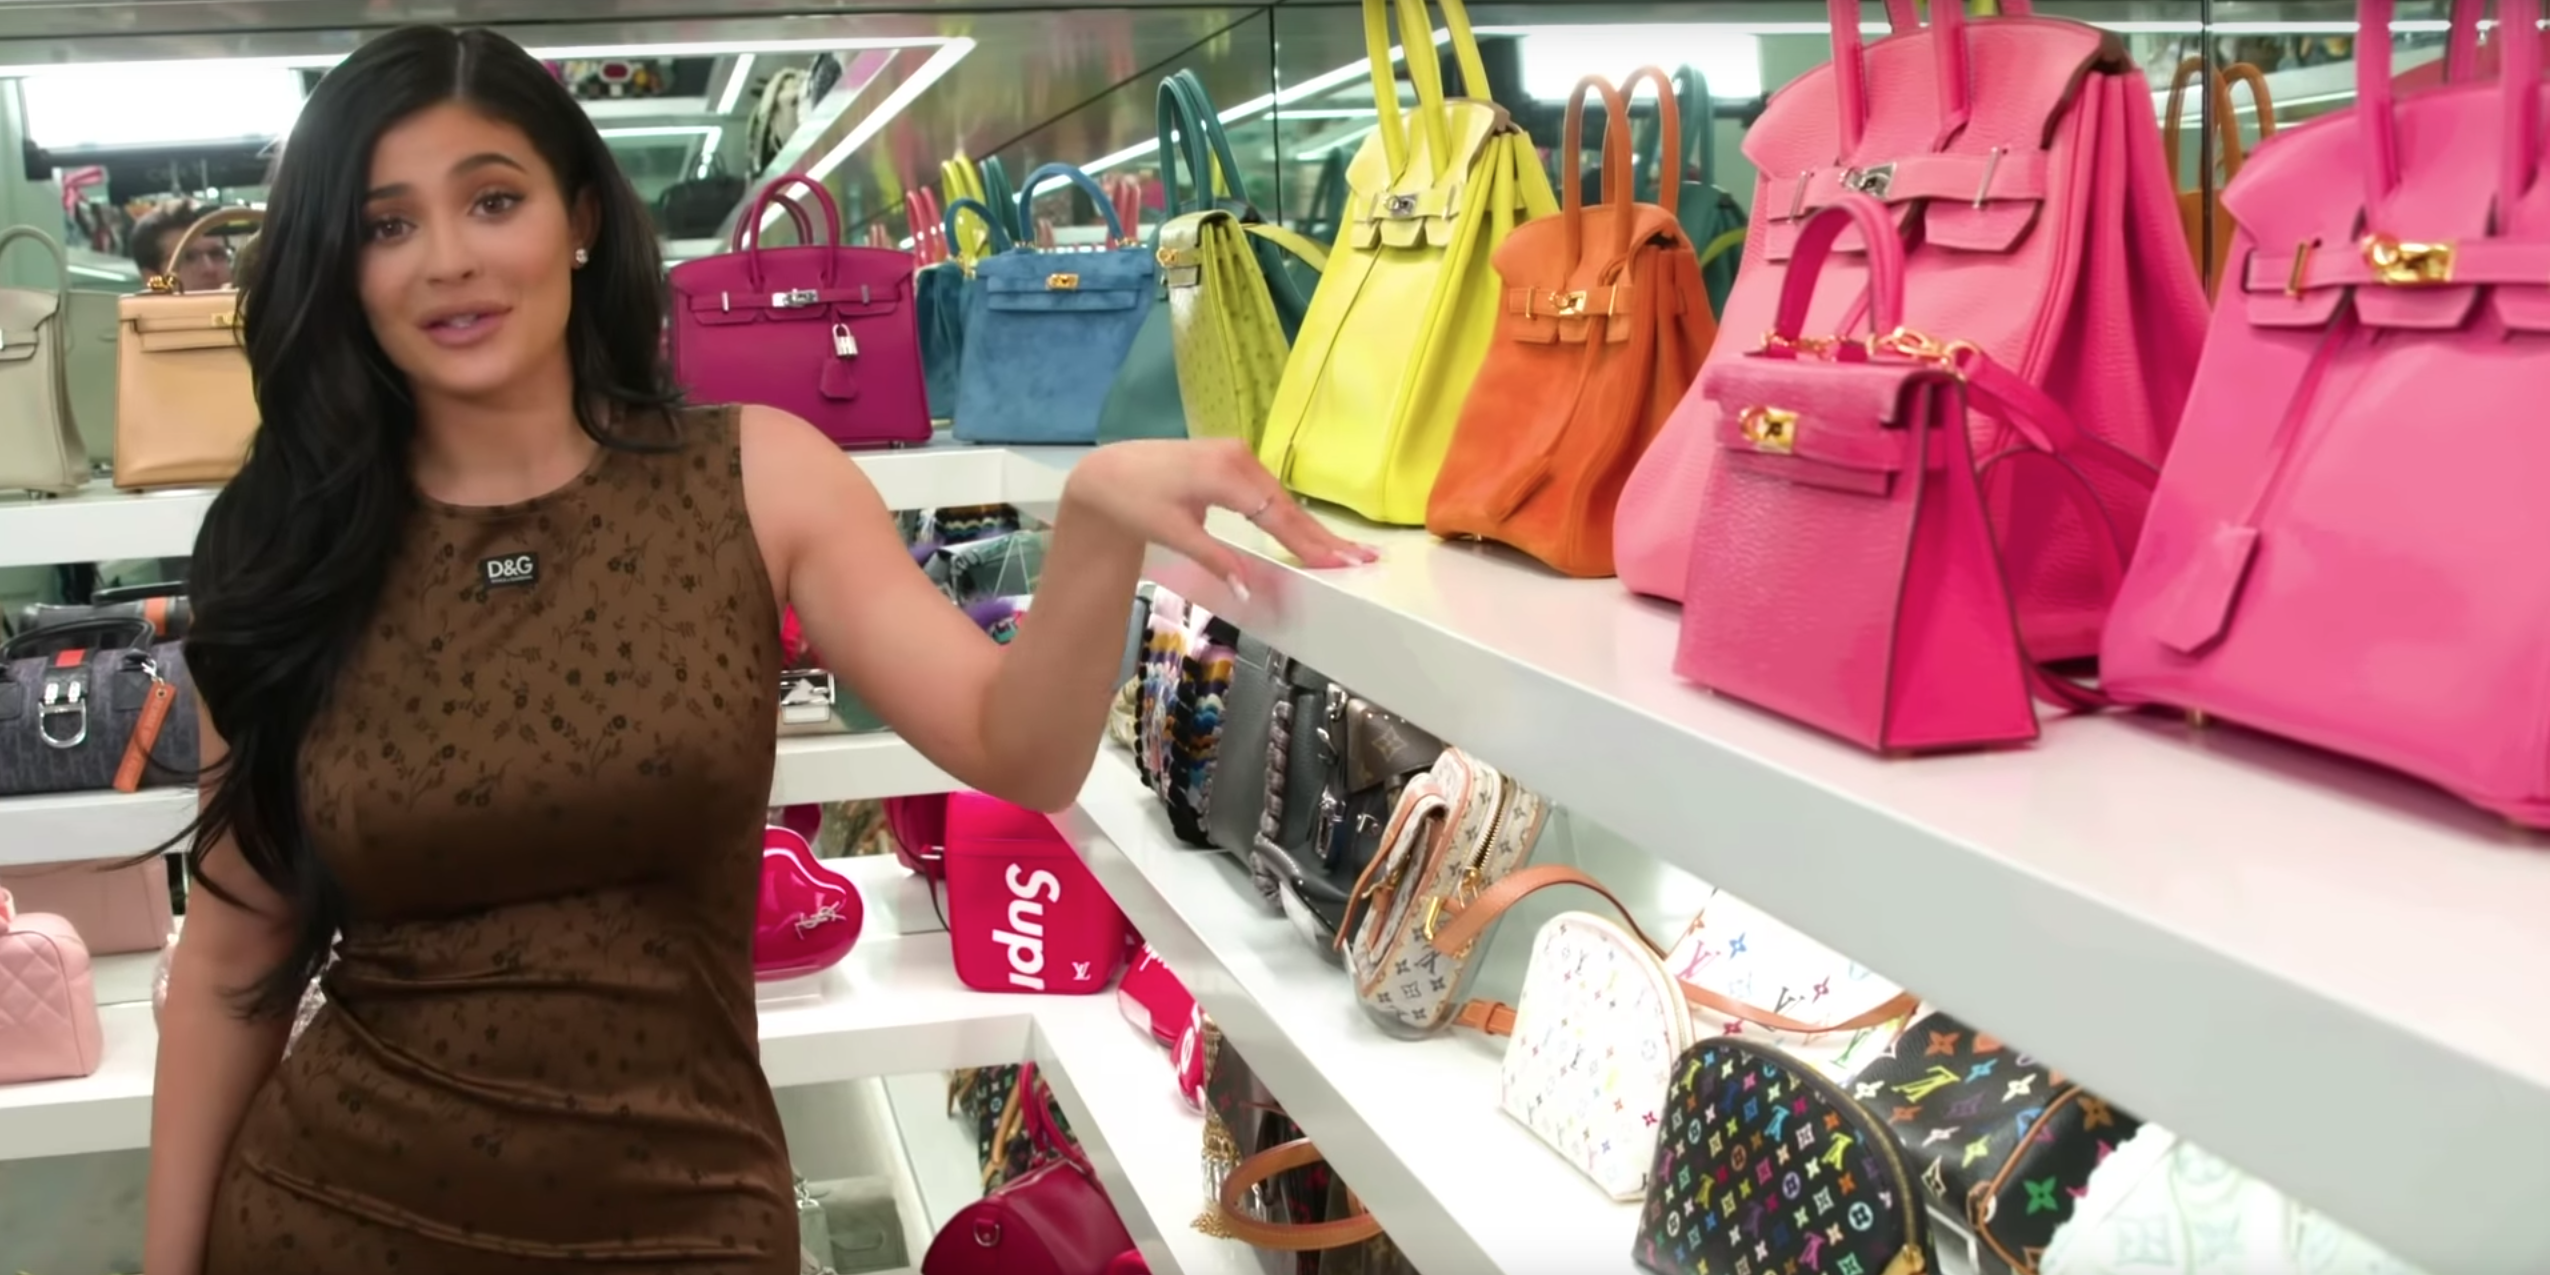 Tour of Her Jaw-Dropping Purse Closet